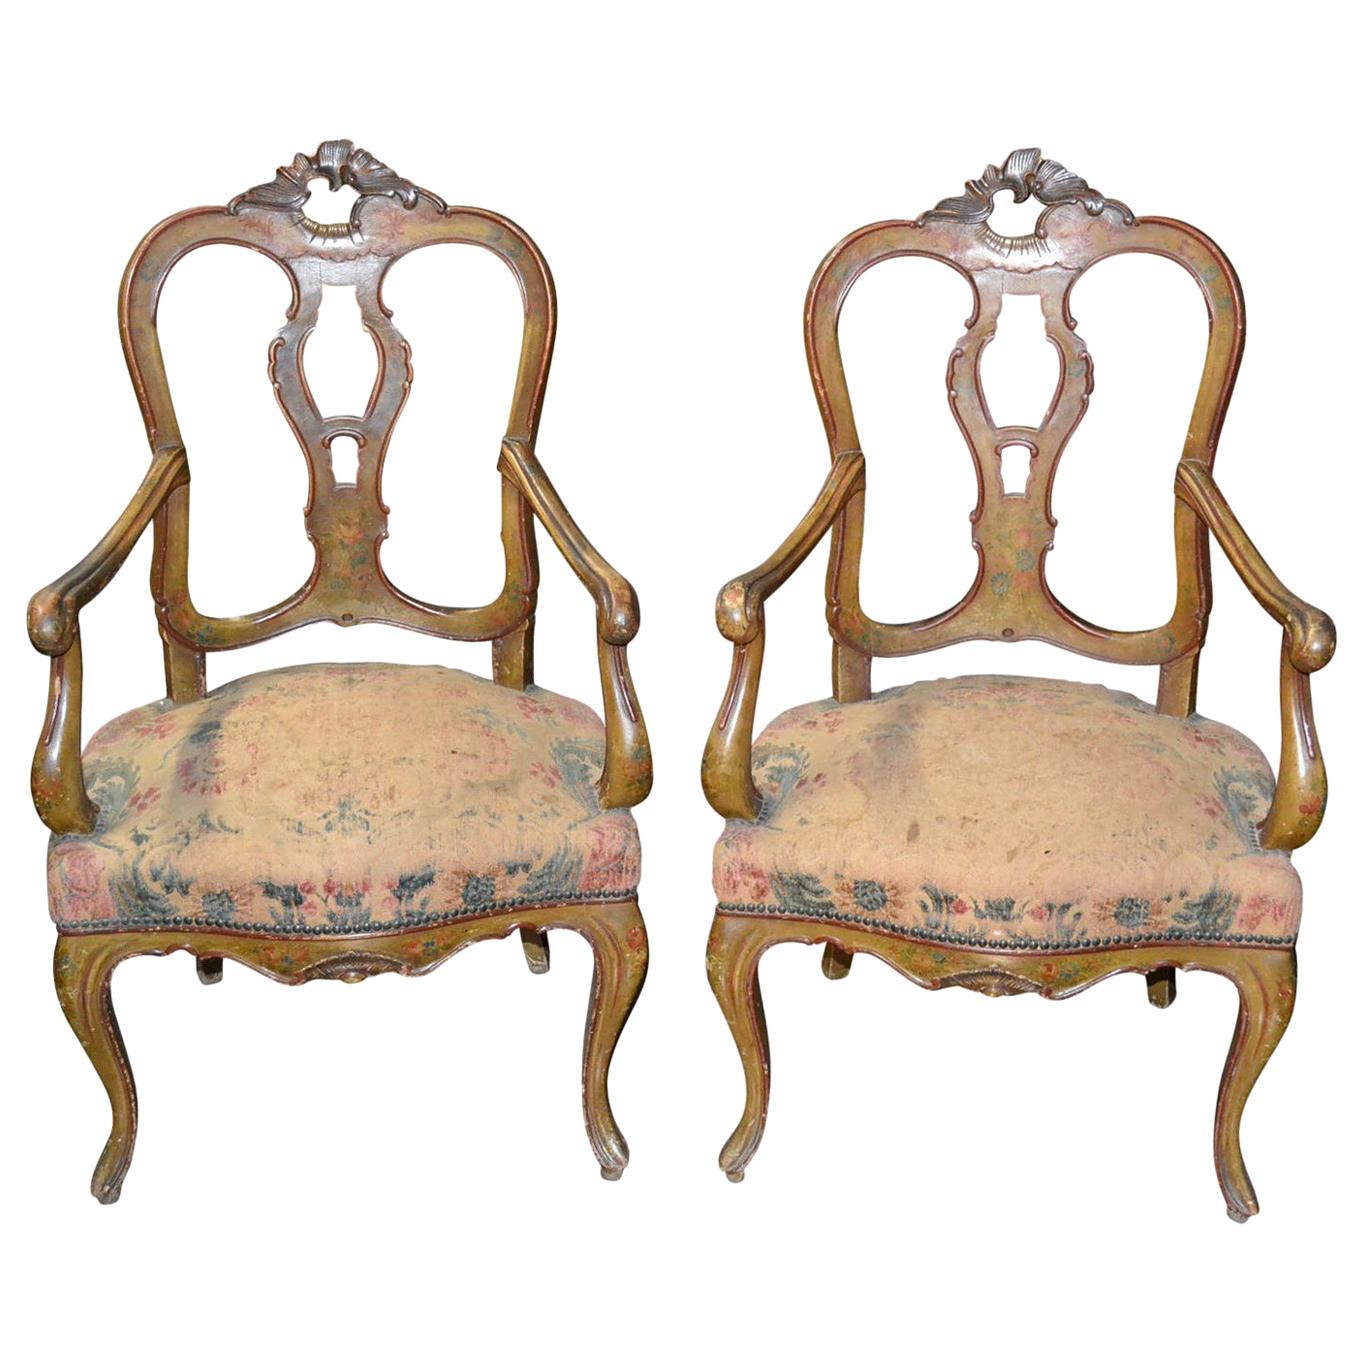 Pair of 19th Century Venetian Hand-Painted Fauteuils